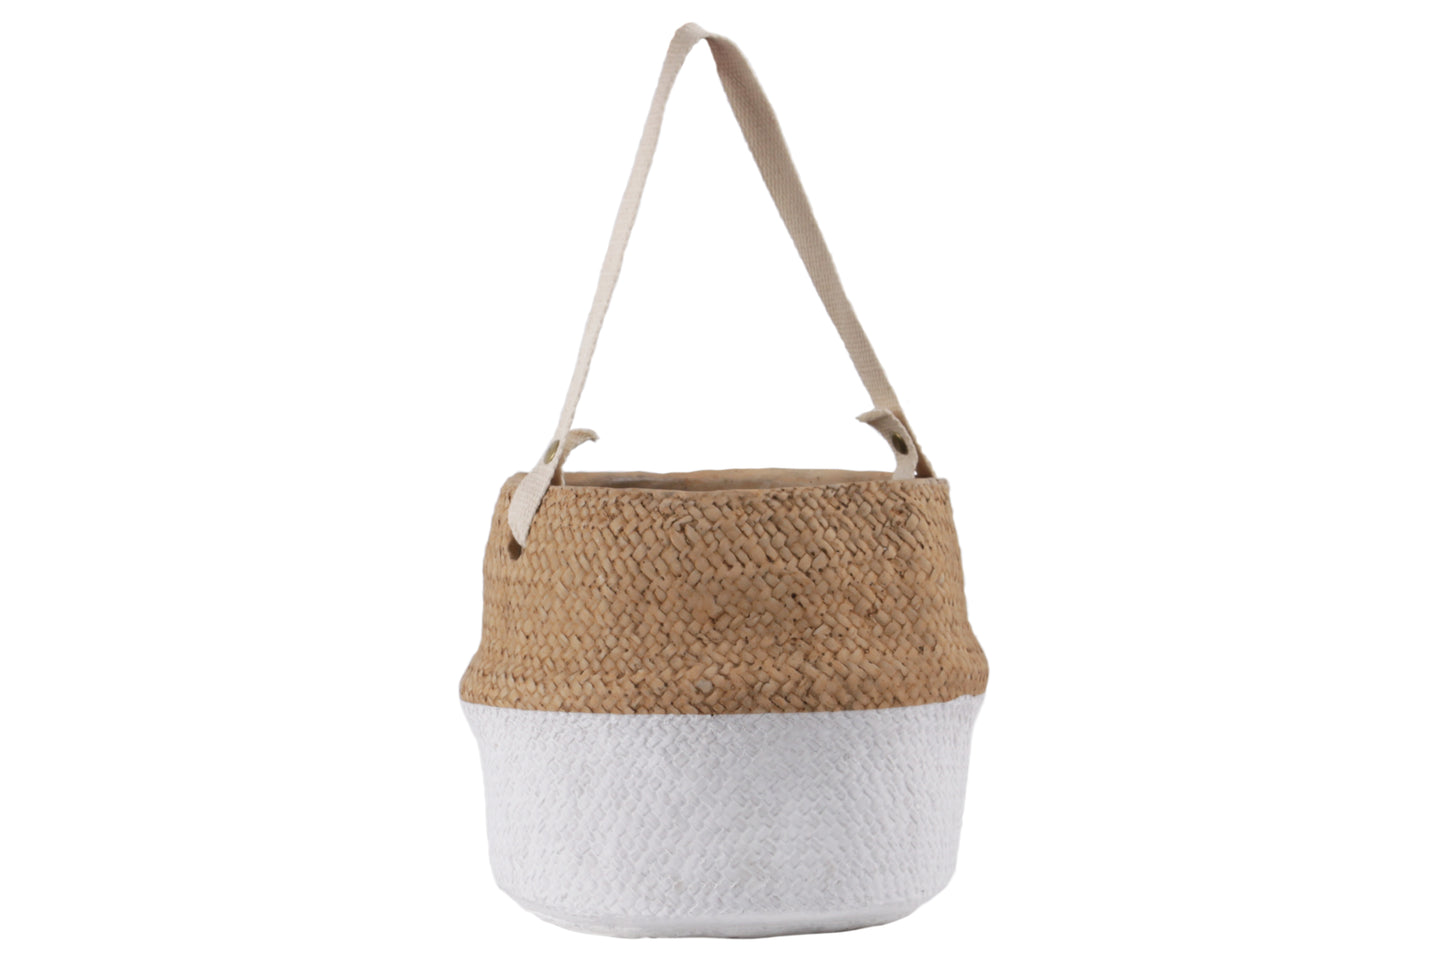 Cement Distorted Round Pot with Cotton Strap Handle, Brass Rivets and Basket Weave Design Body, and White Banded Bottom